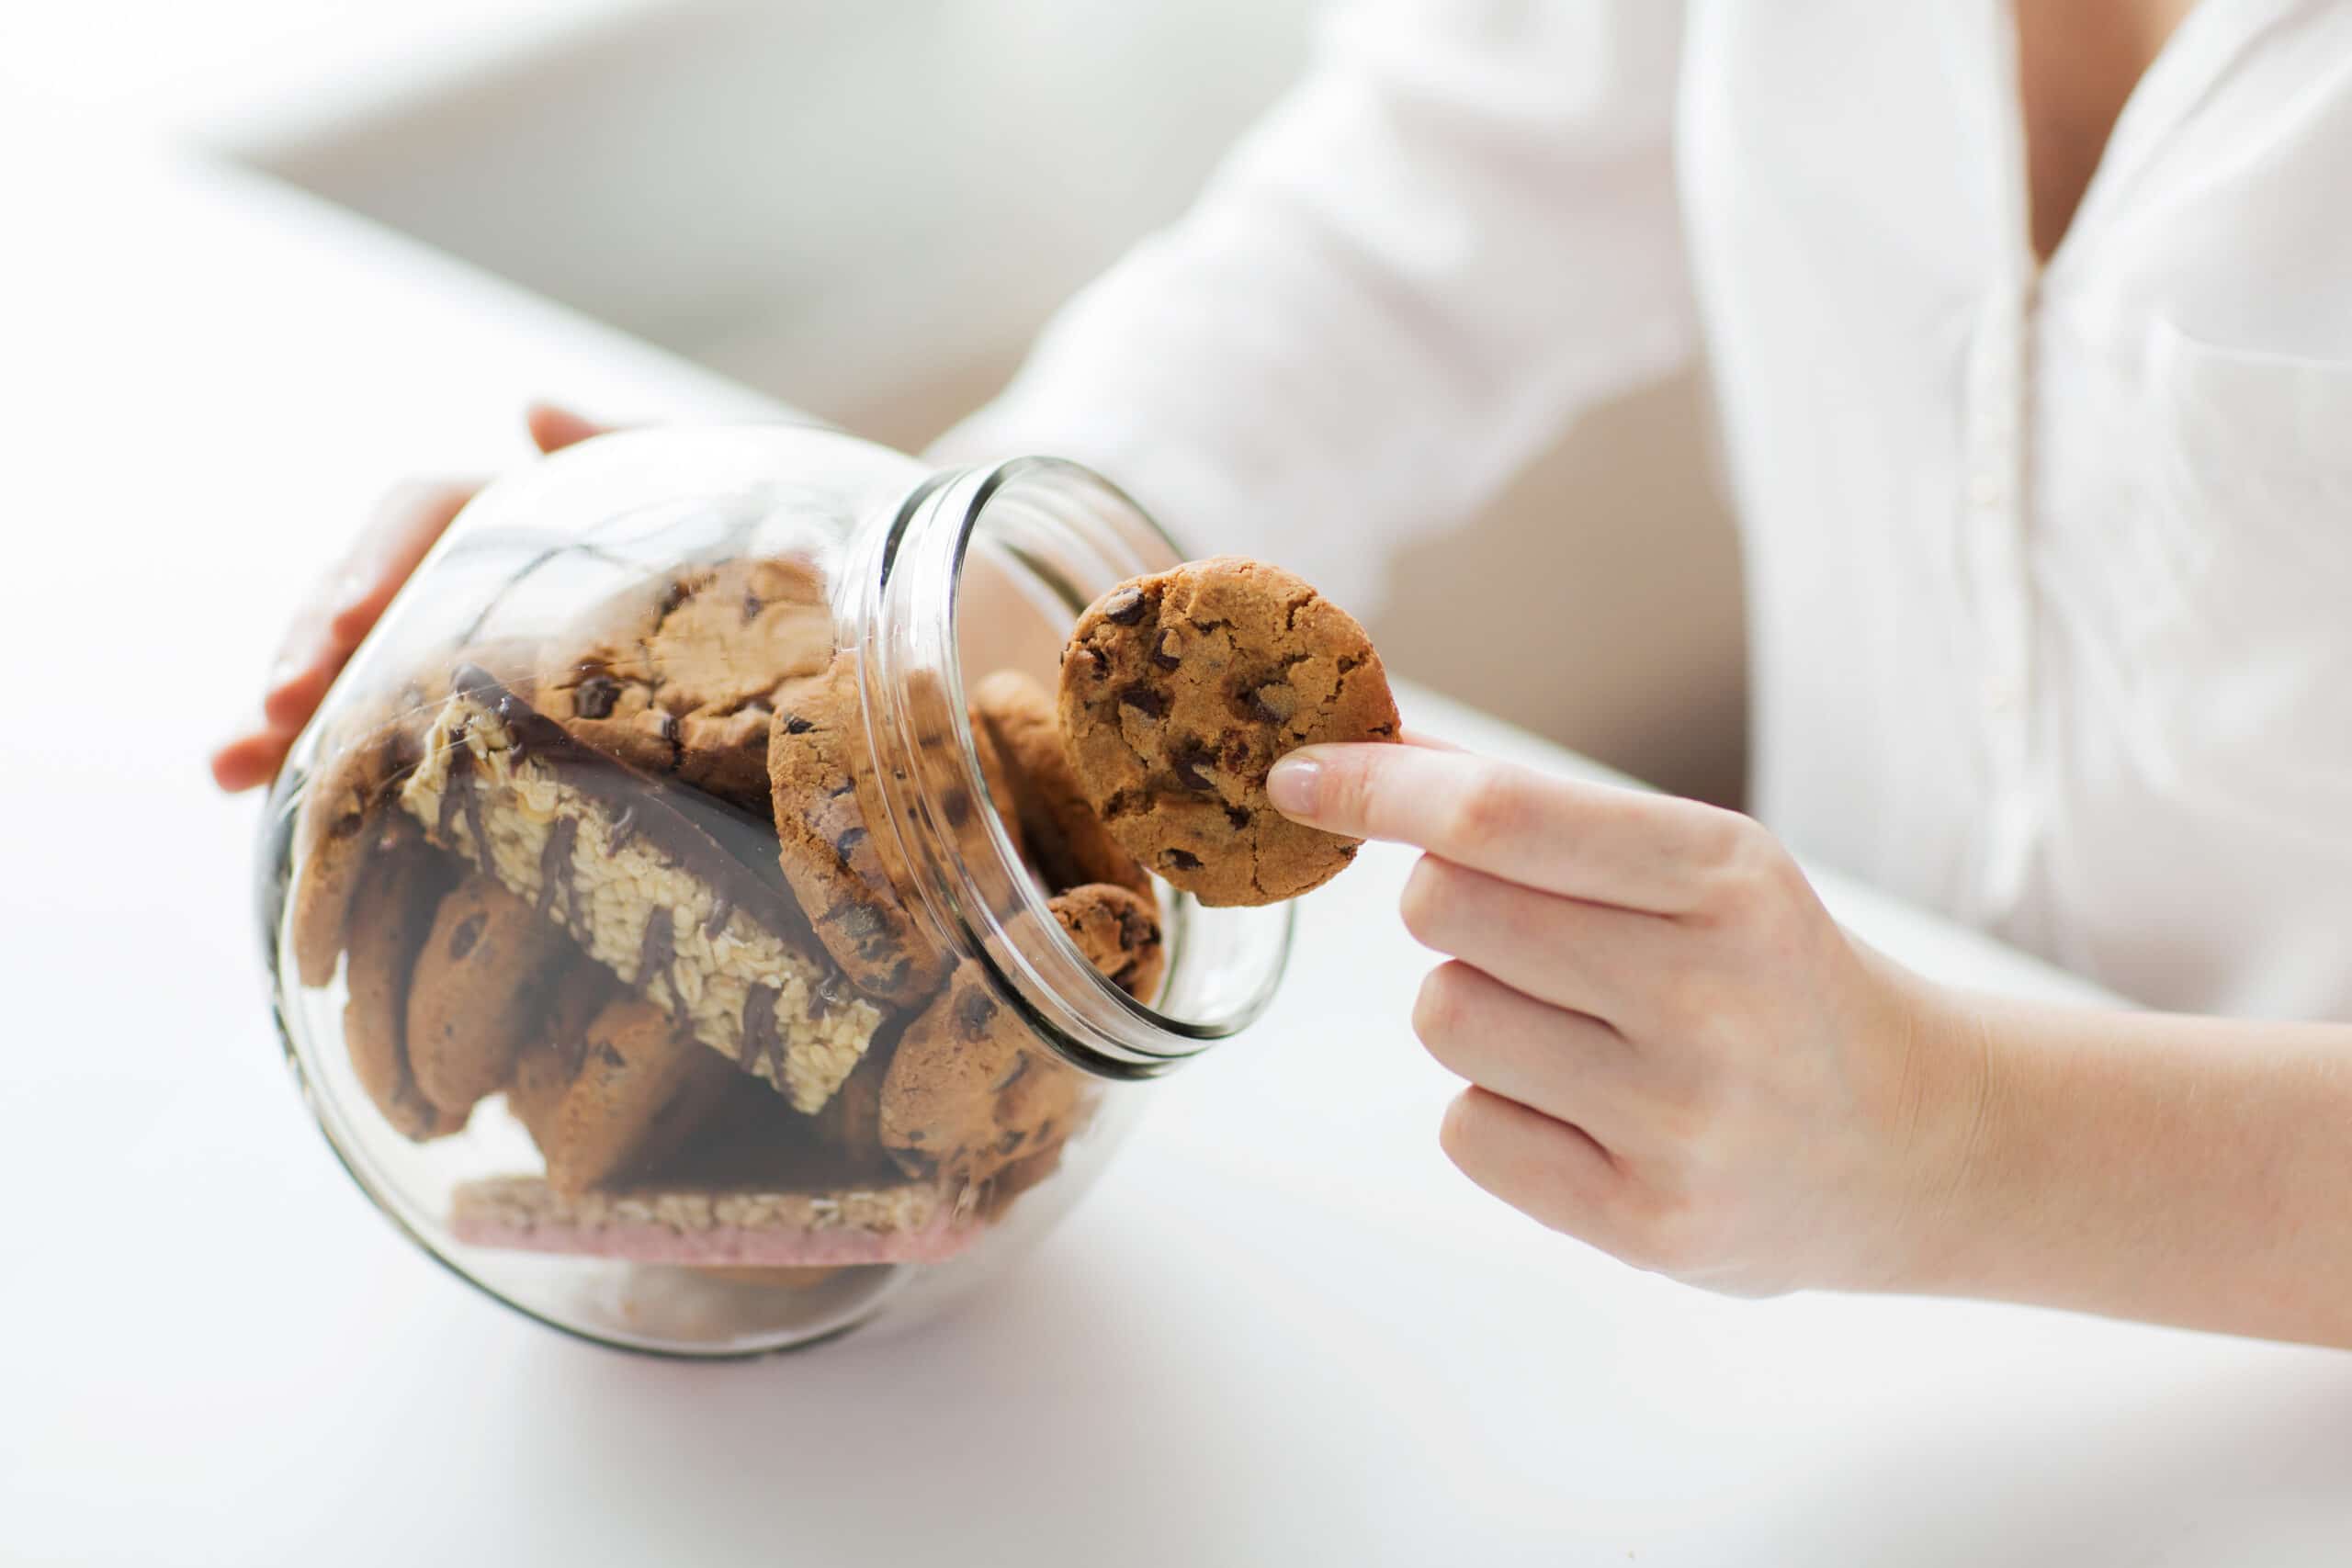 Cookies policy: people, junk food, culinary, baking and unhealthy eating concept - close up of hands with chocolate oatmeal cookies and muesli bars in glass jar